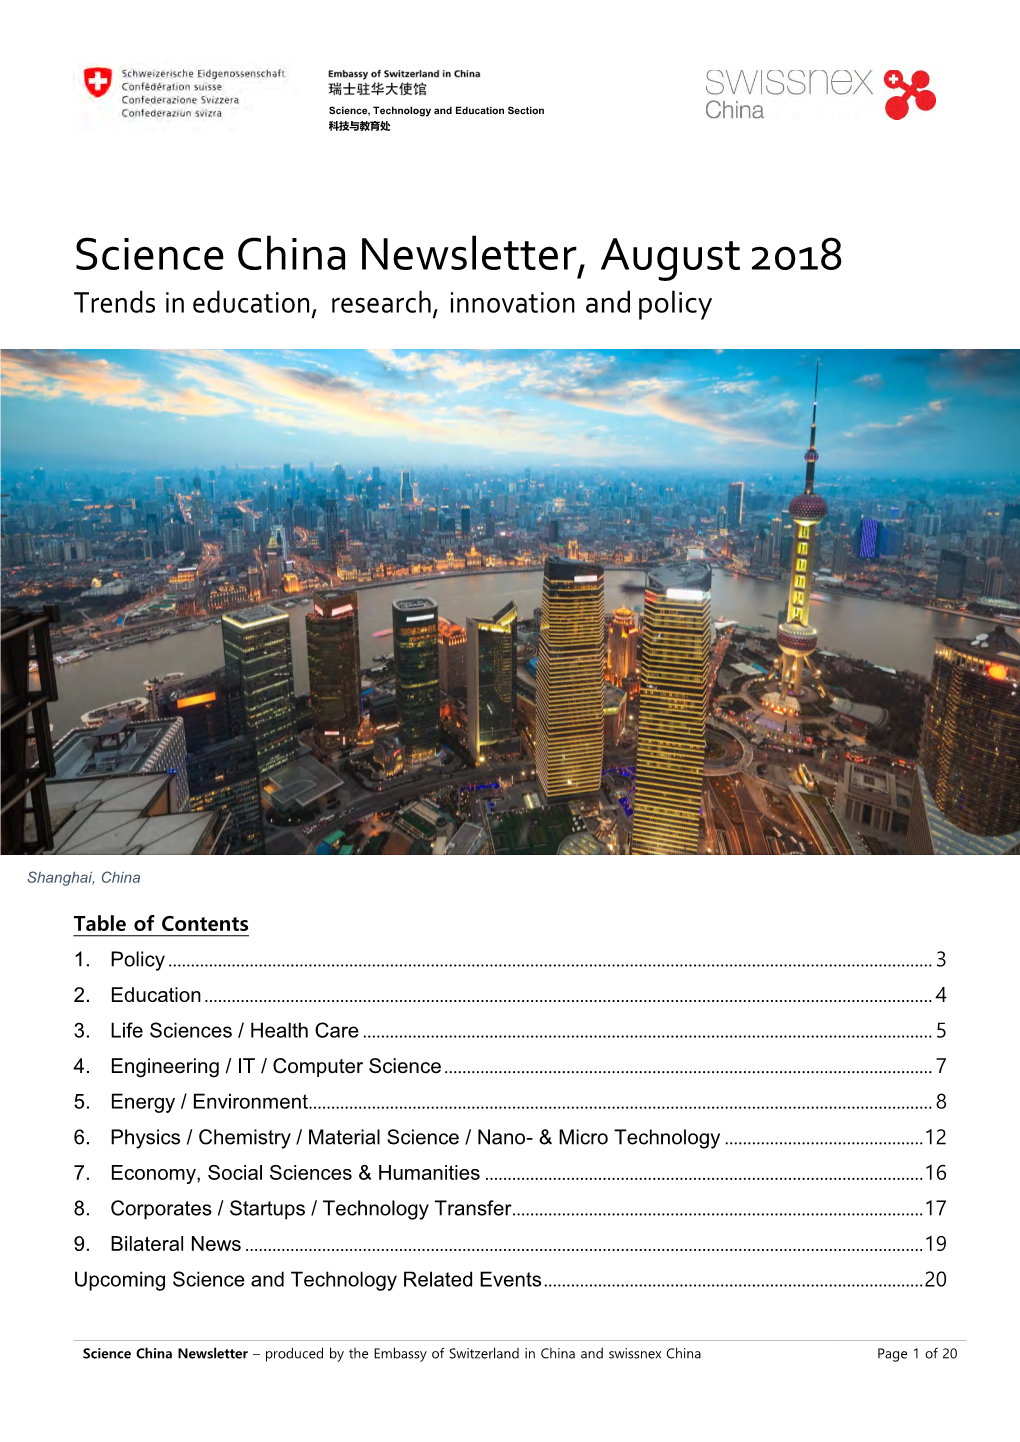 Science China Newsletter, August 2018 Trends in Education, Research, Innovation and Policy